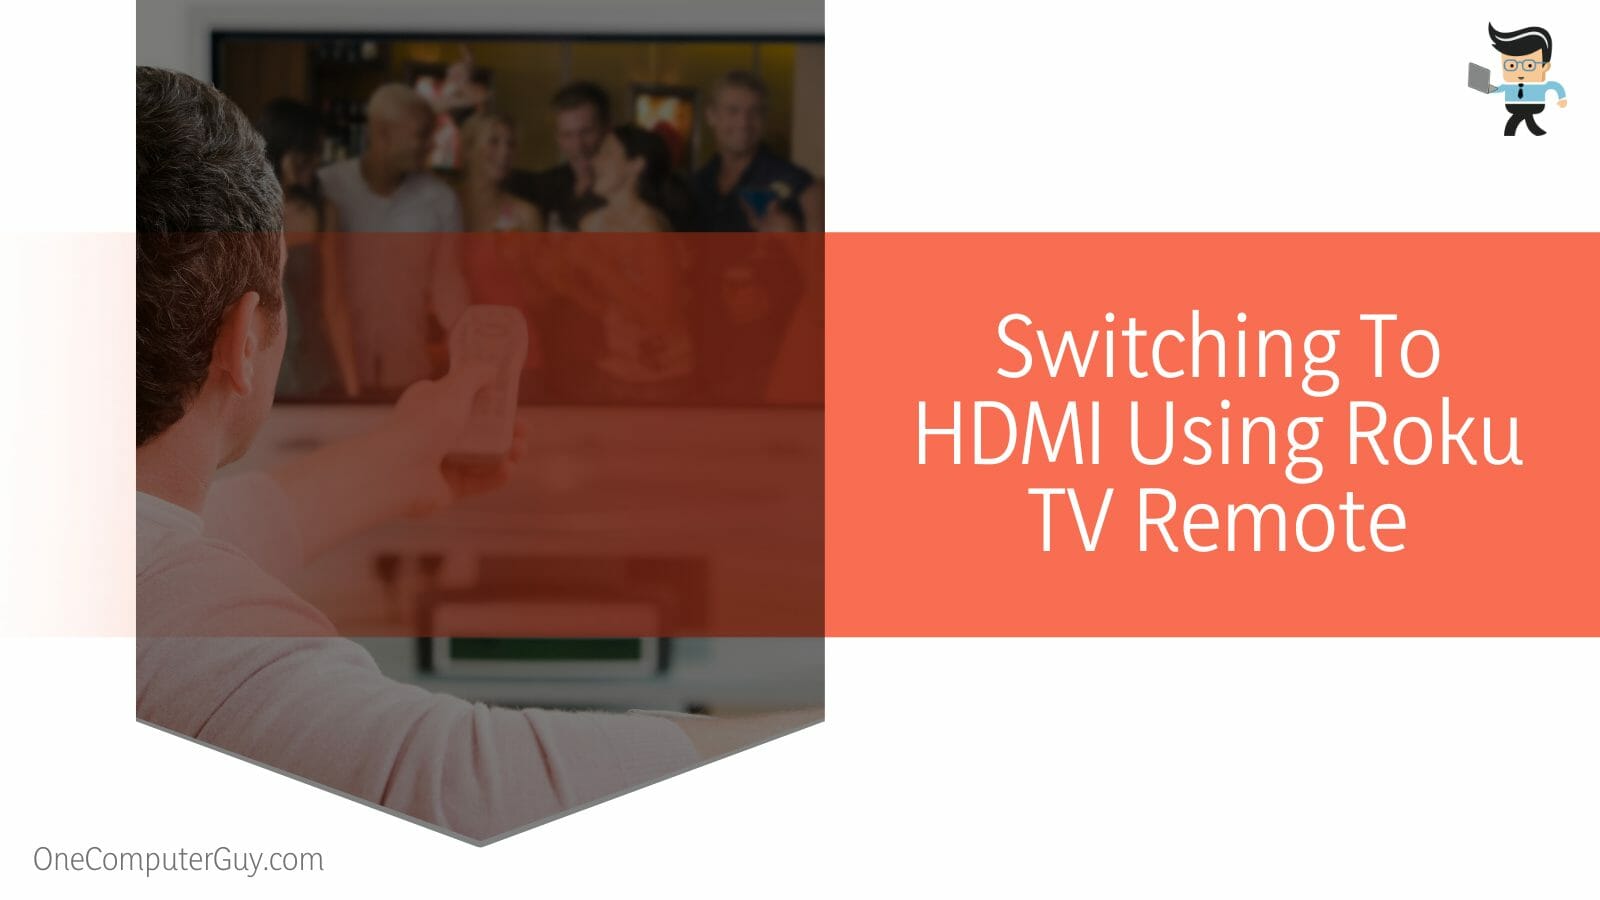 Switching To HDMI Using Roku TV Remote